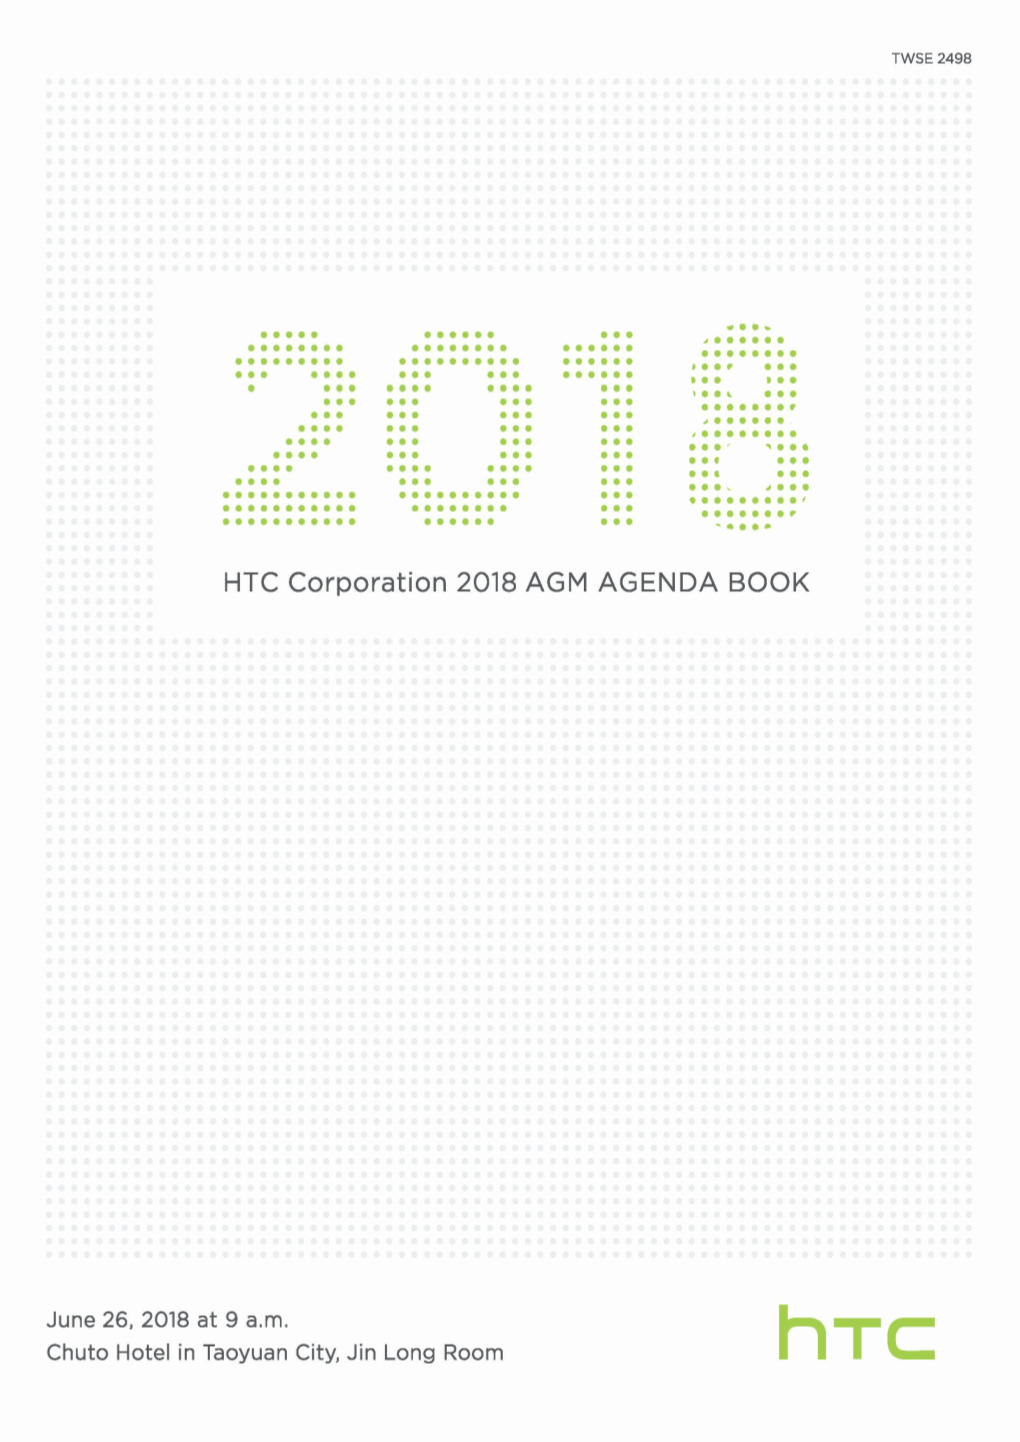 HTC CORPORATION 2018 Annual General